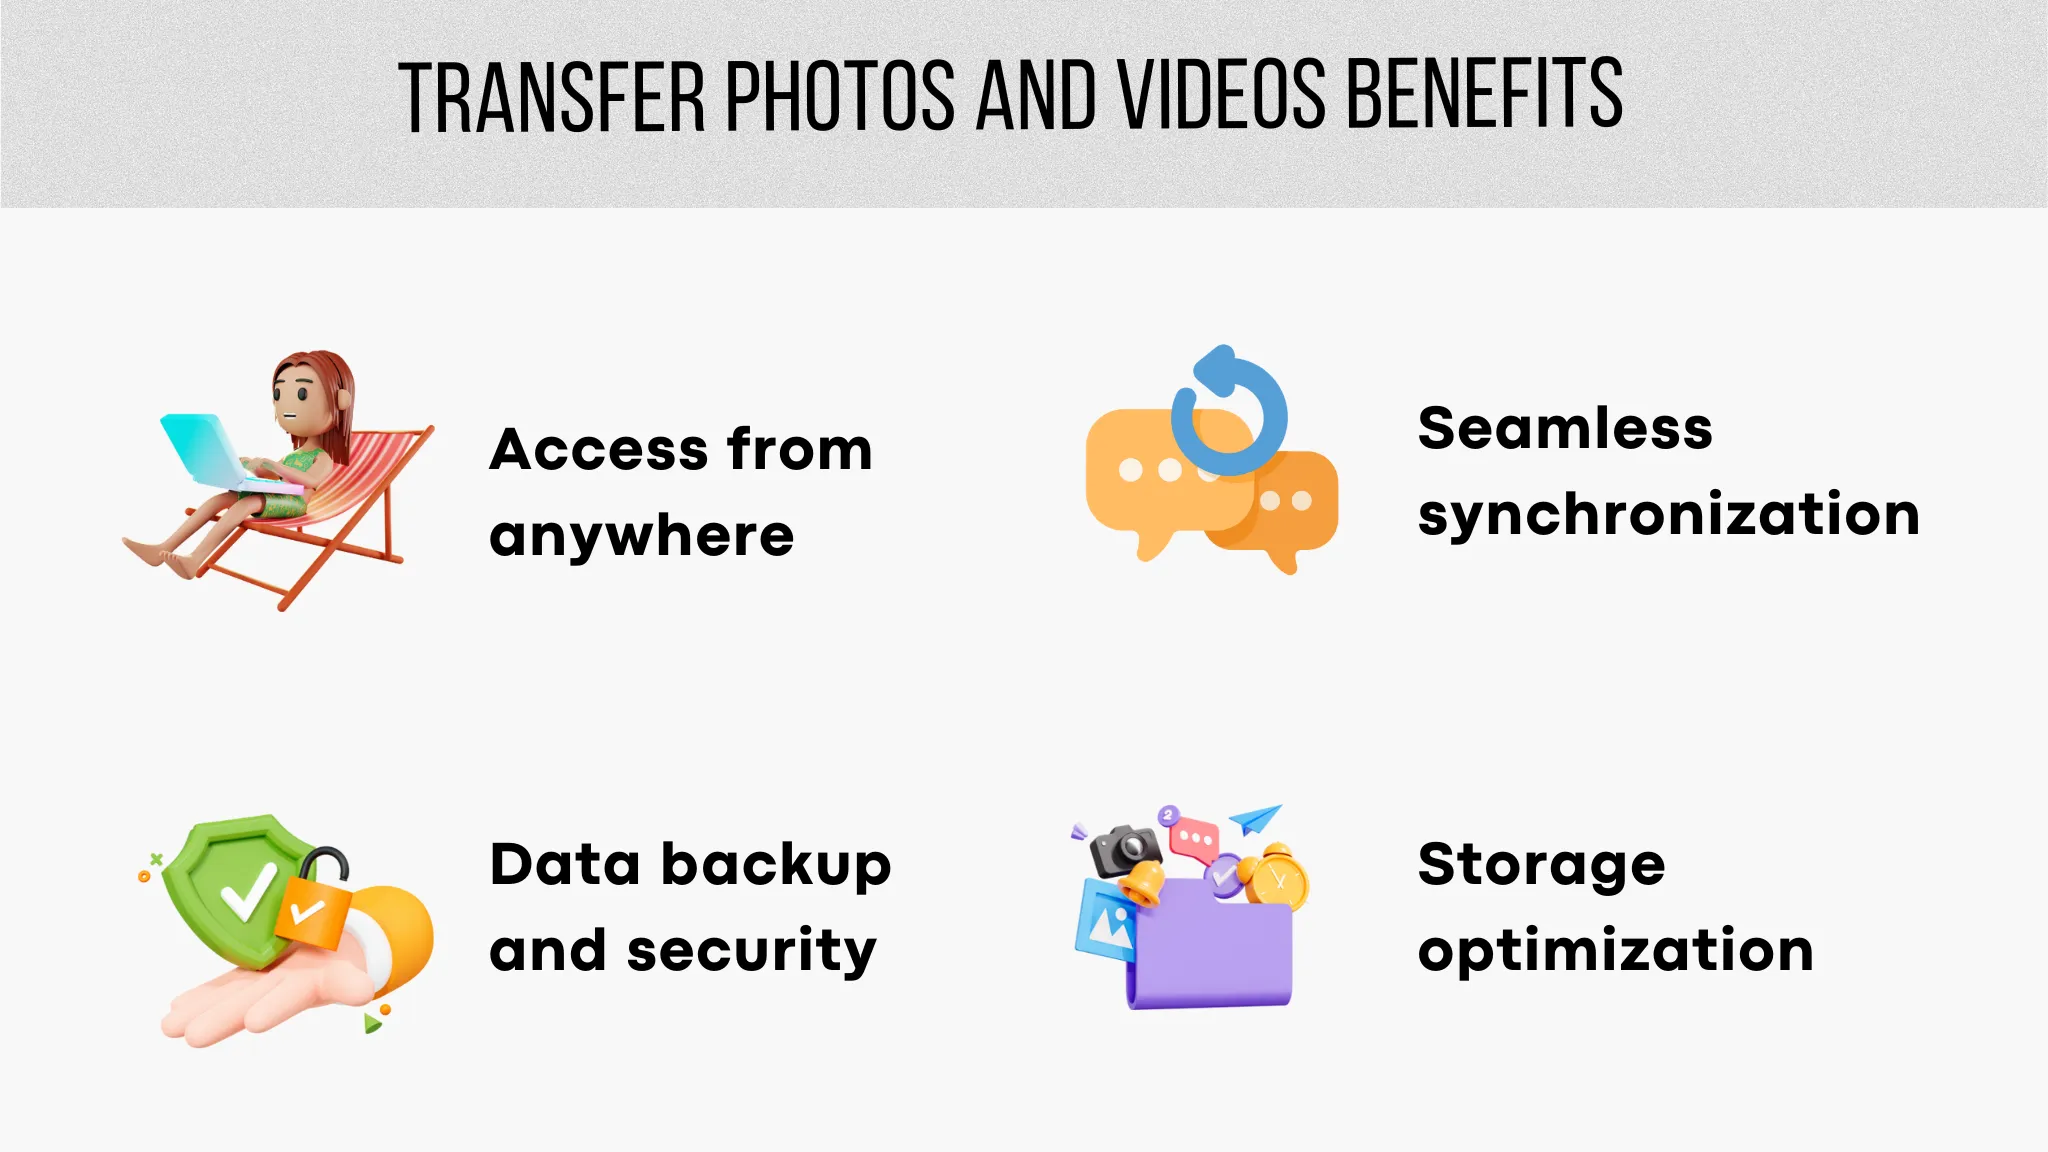 Why transfer photos and videos from iPhoto to iCloud Drive